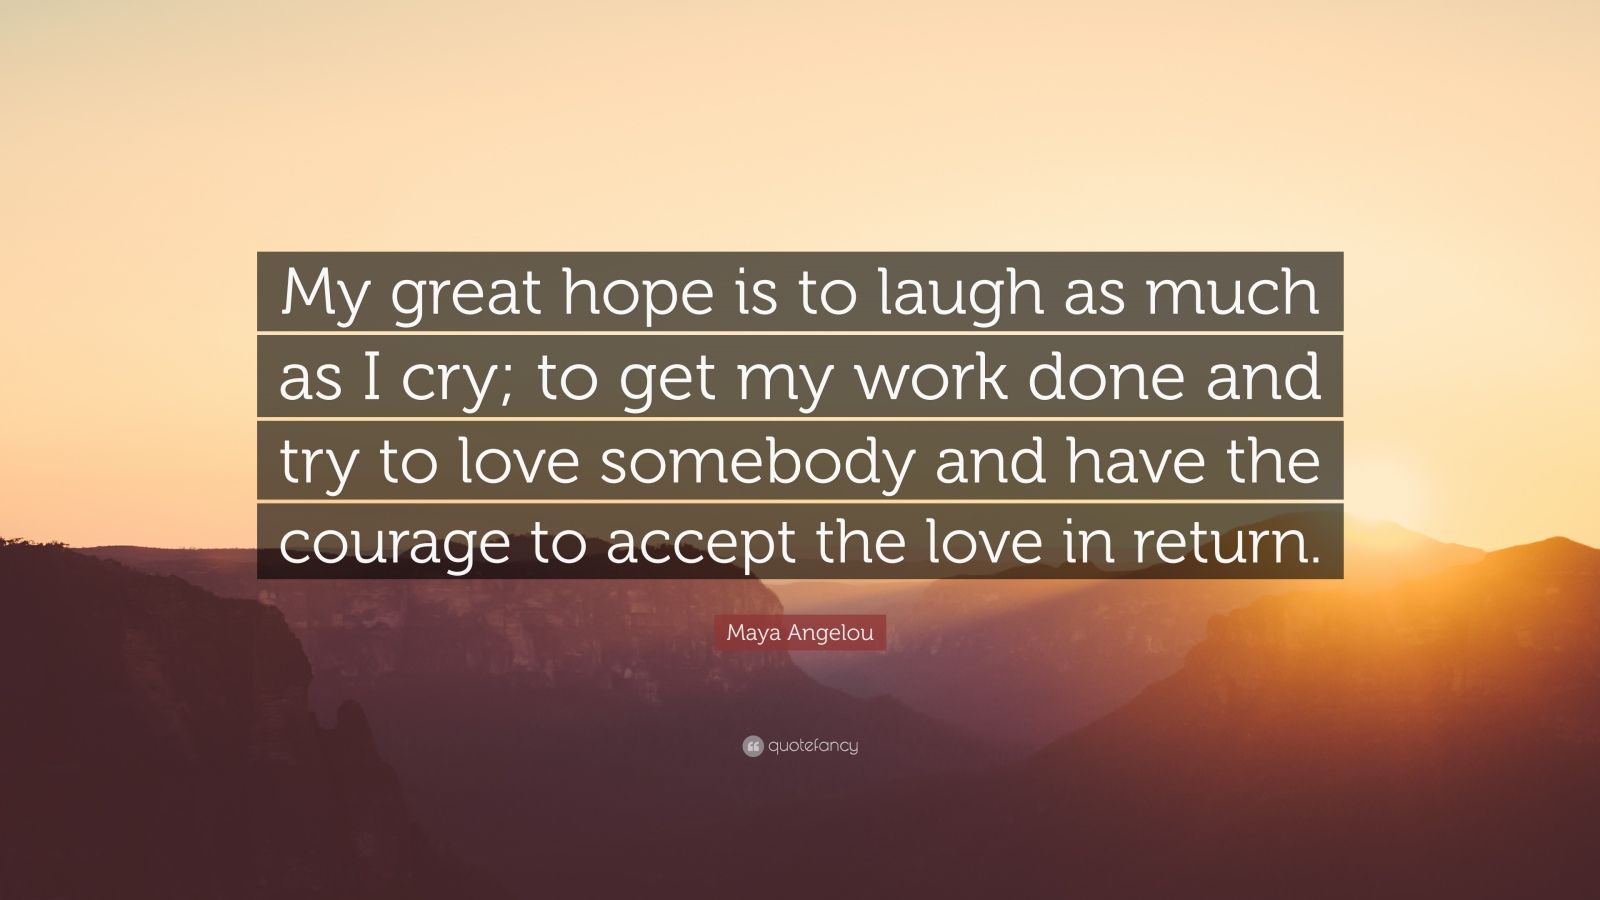 Maya Angelou Quote “My great hope is to laugh as much as I cry